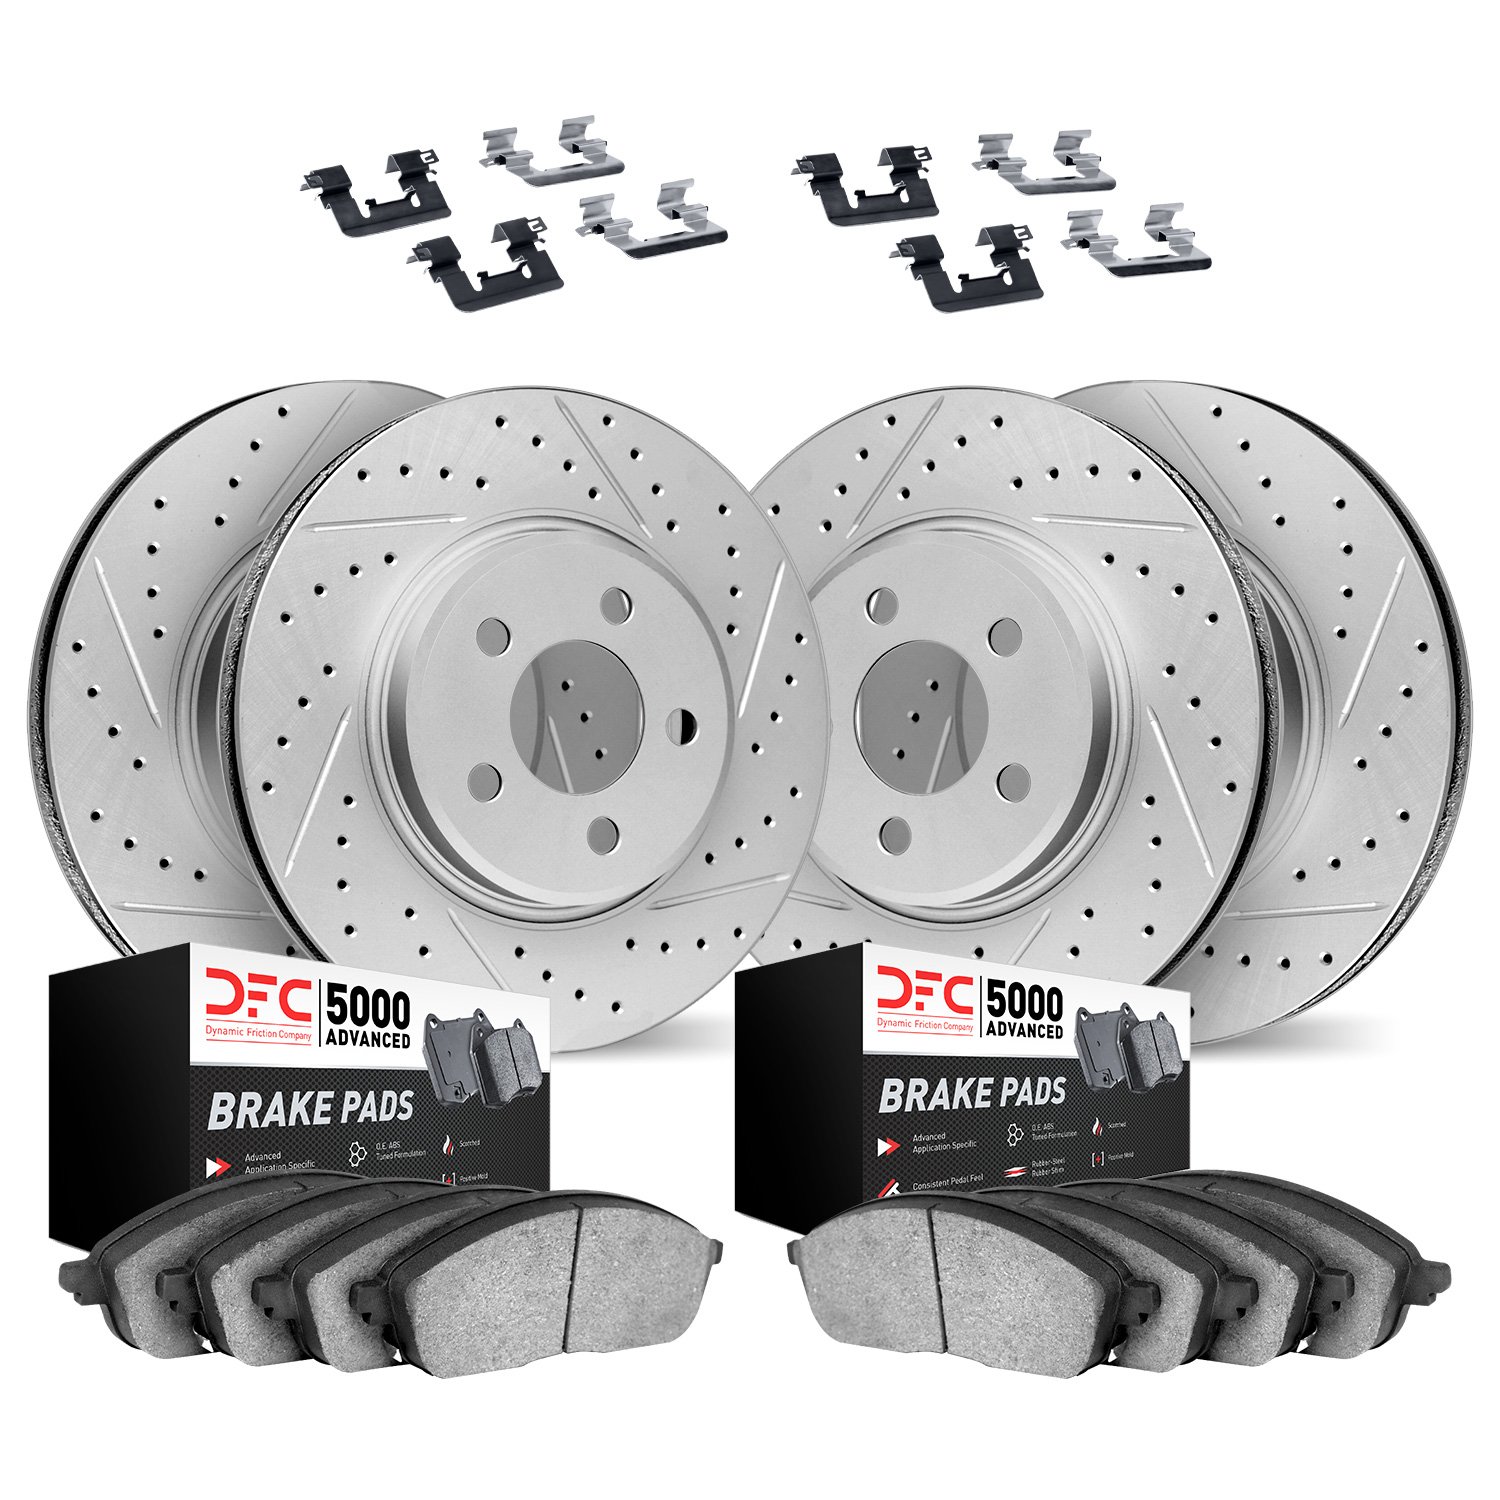 2514-54274 Geoperformance Drilled/Slotted Rotors w/5000 Advanced Brake Pads Kit & Hardware, Fits Select Ford/Lincoln/Mercury/Maz